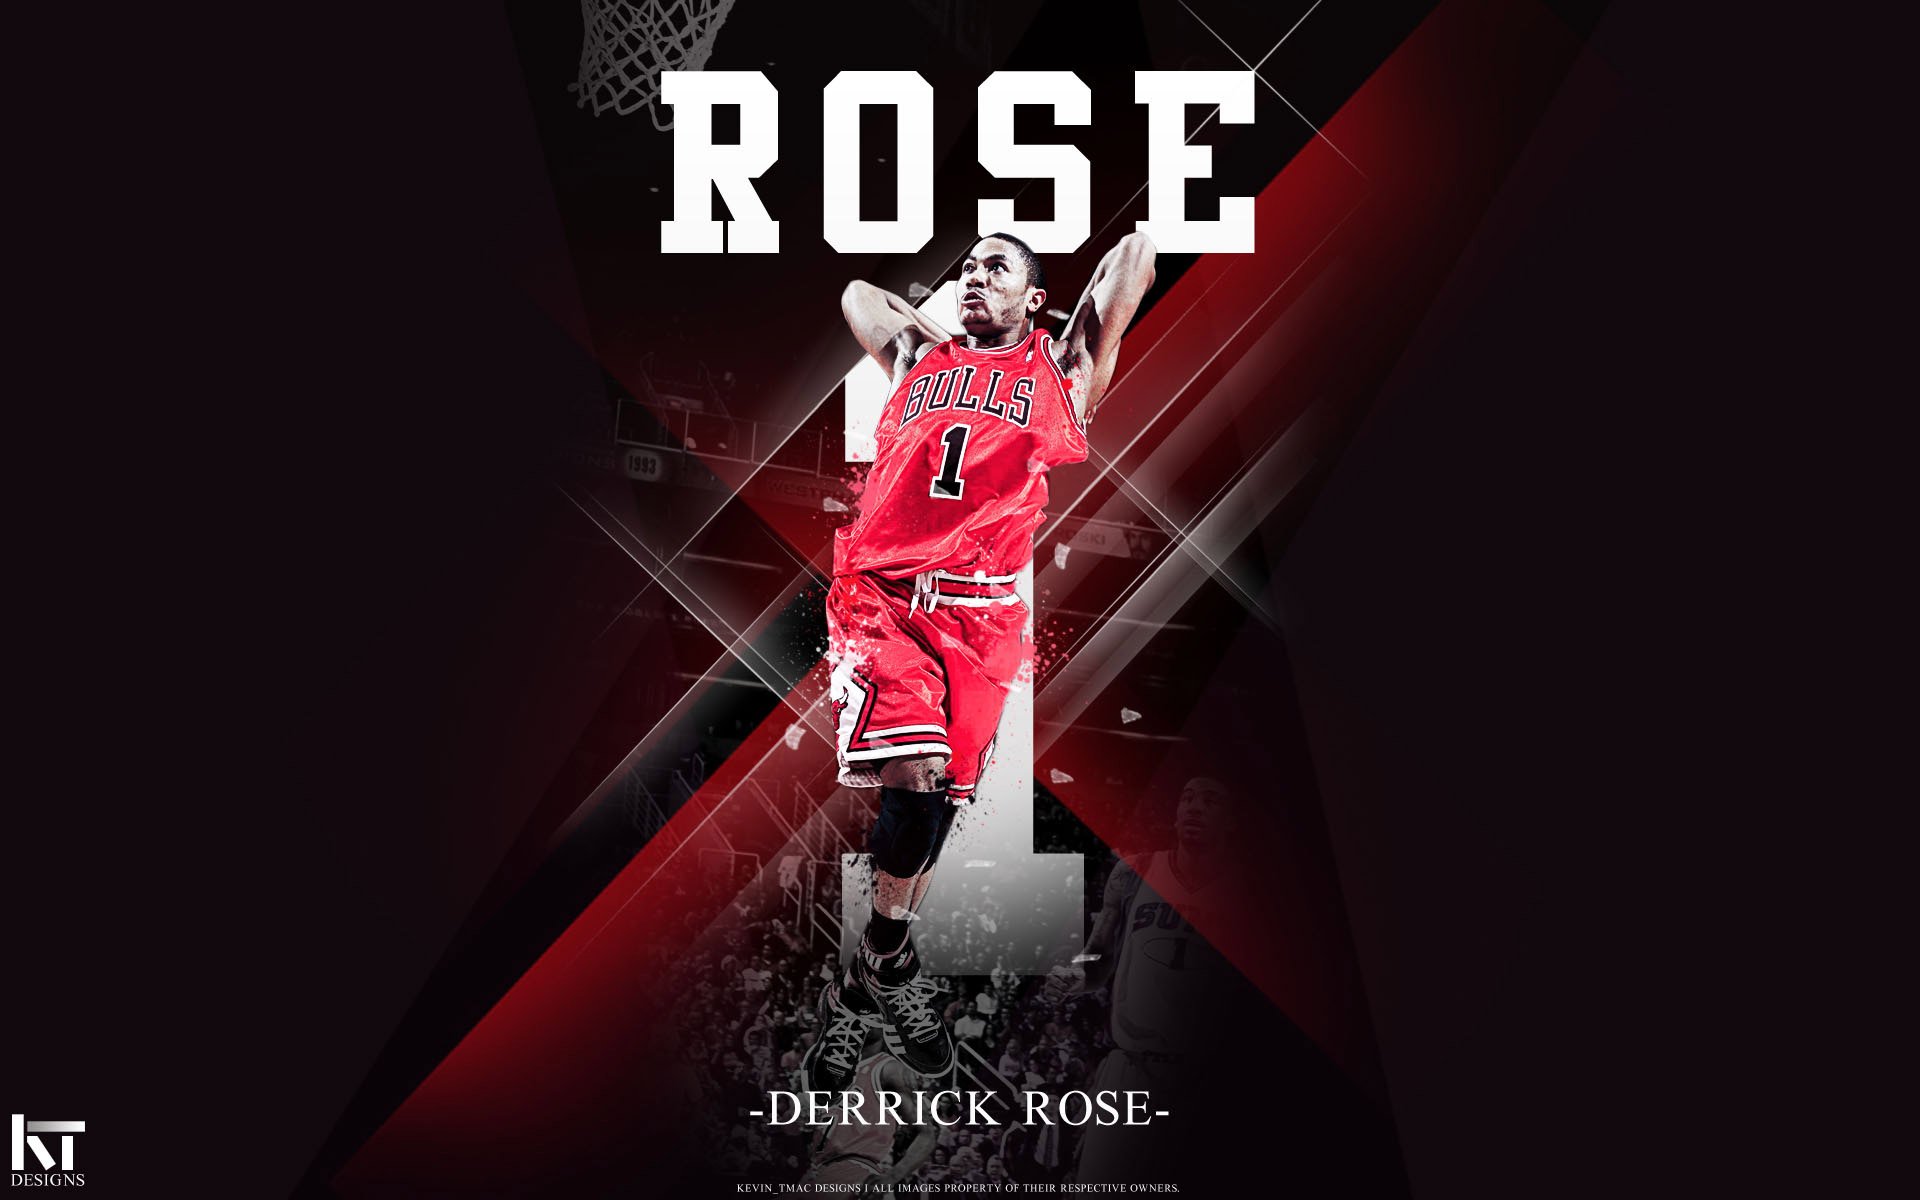 derrick rose wallpaper iphone,red,poster,graphic design,text,font